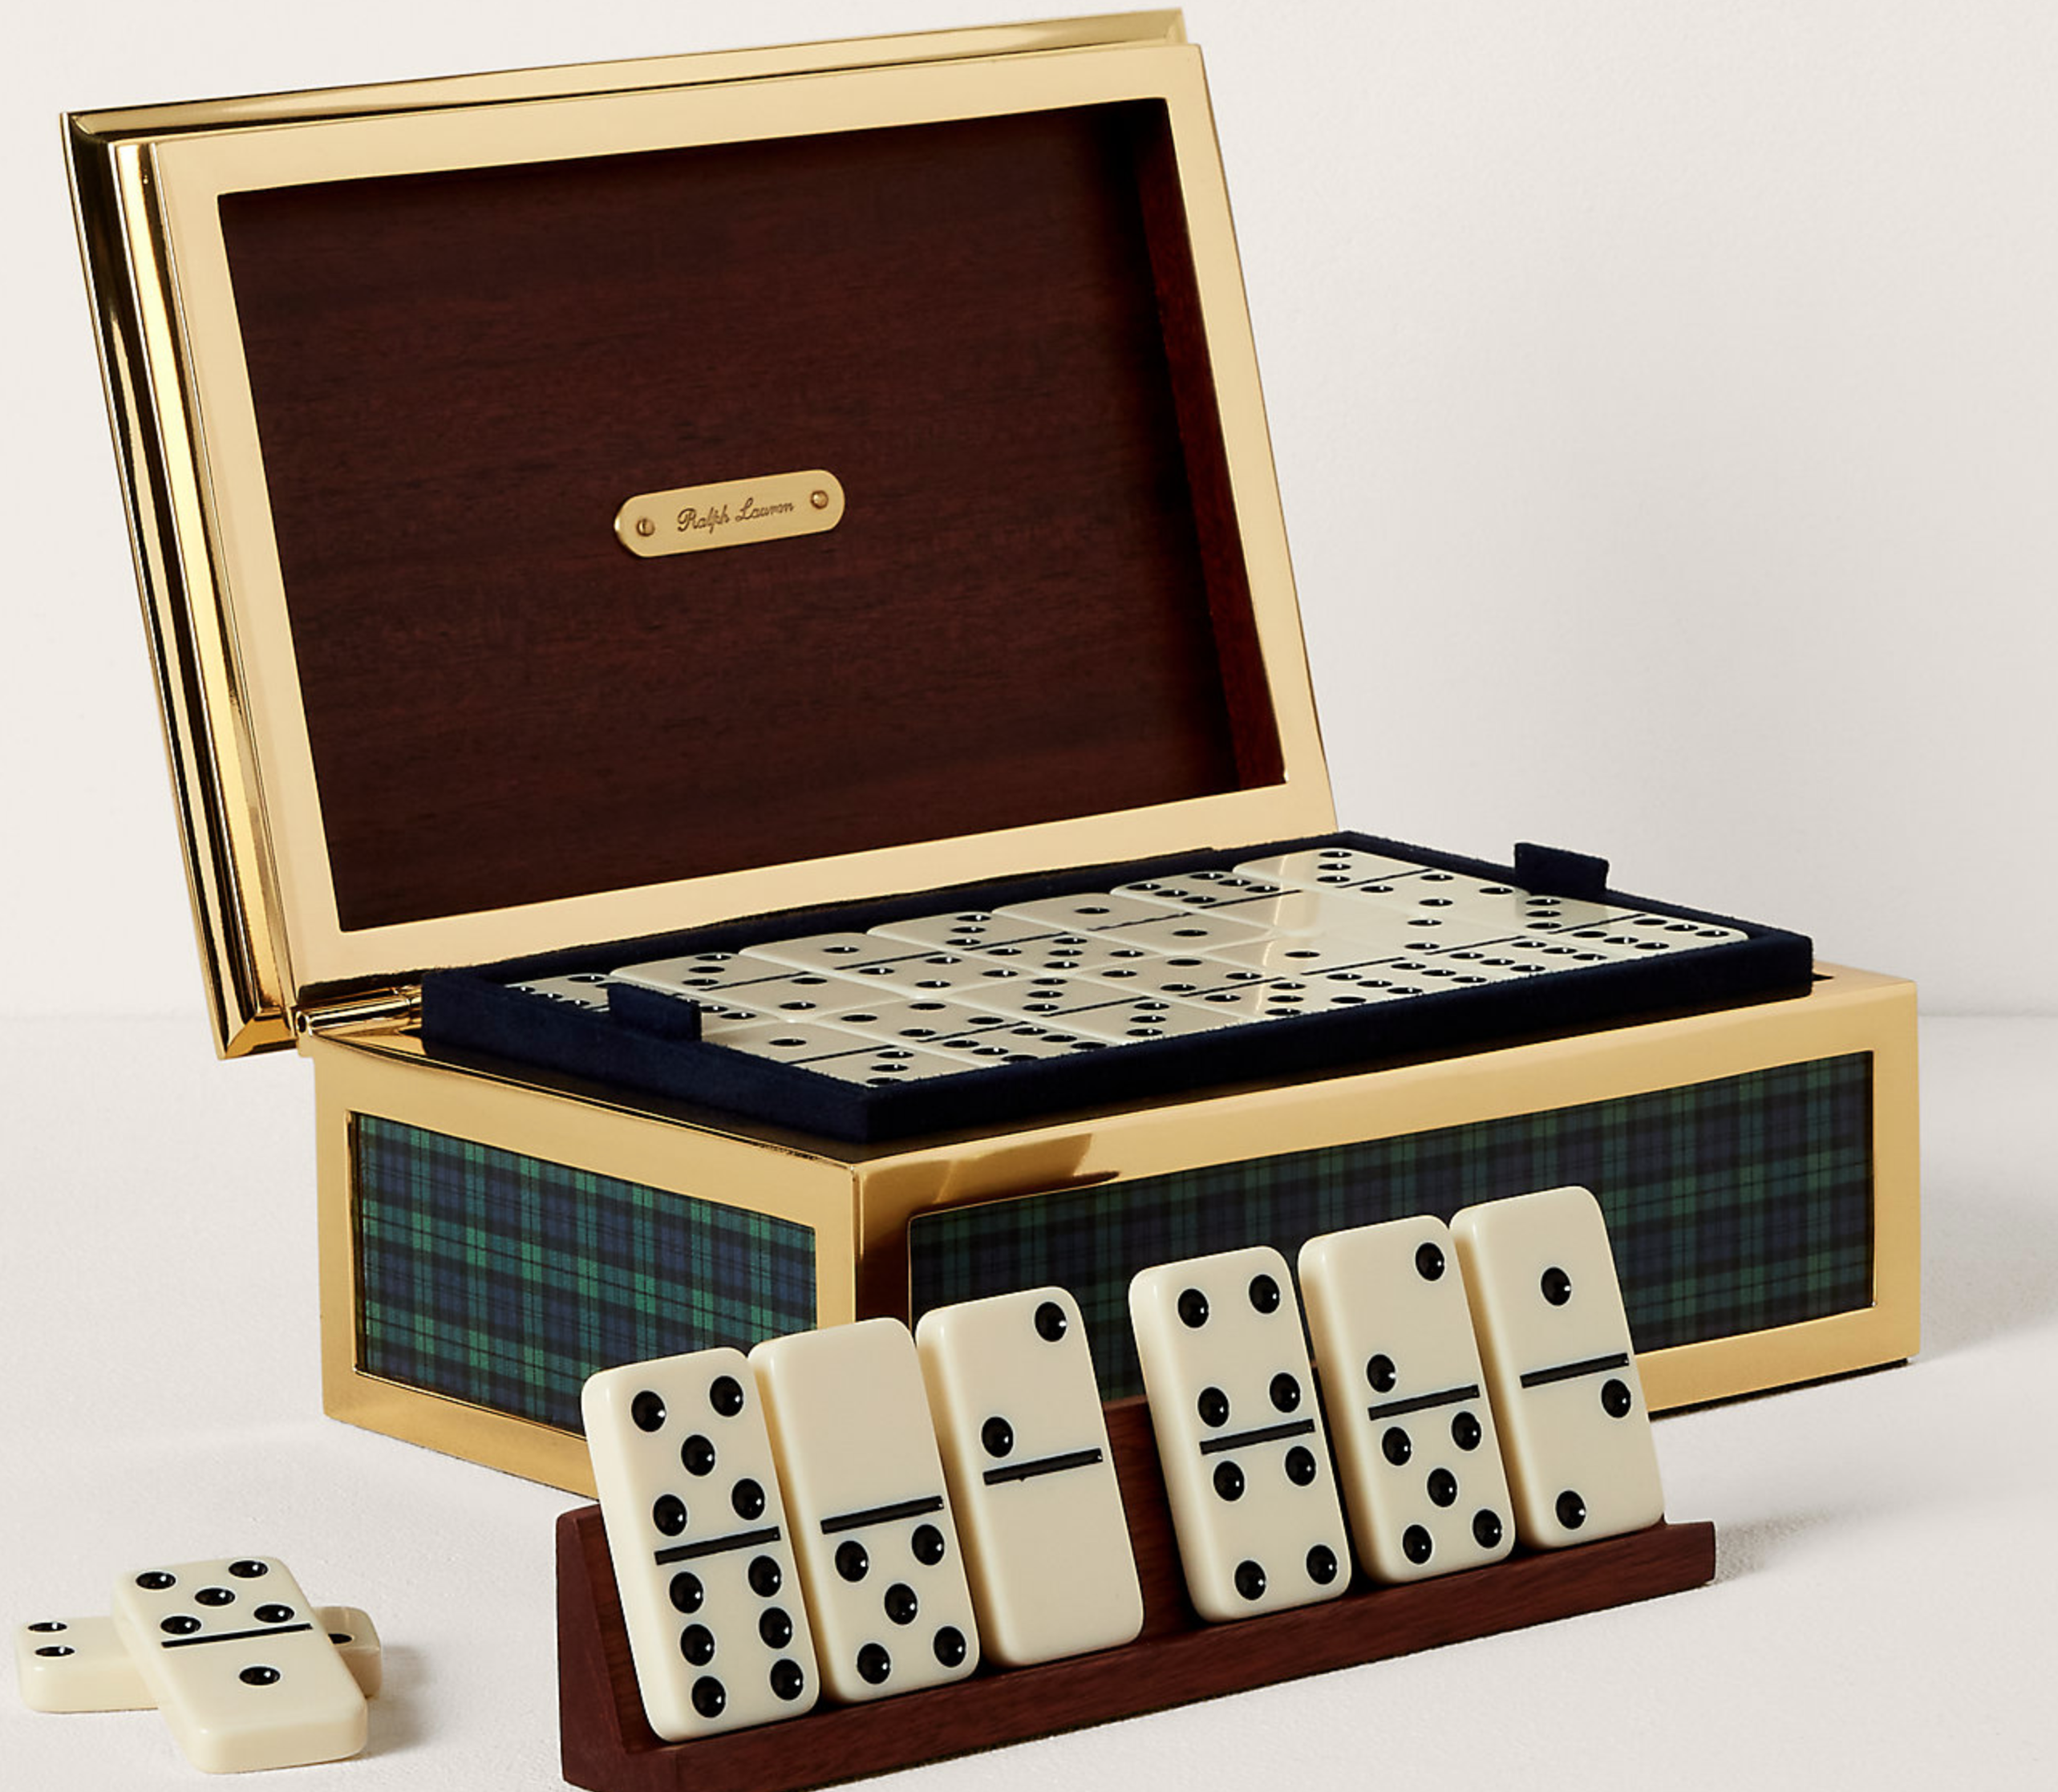 A luxury green plaid and gold domino set for unique grooms gifts available at Ralph Lauren. 